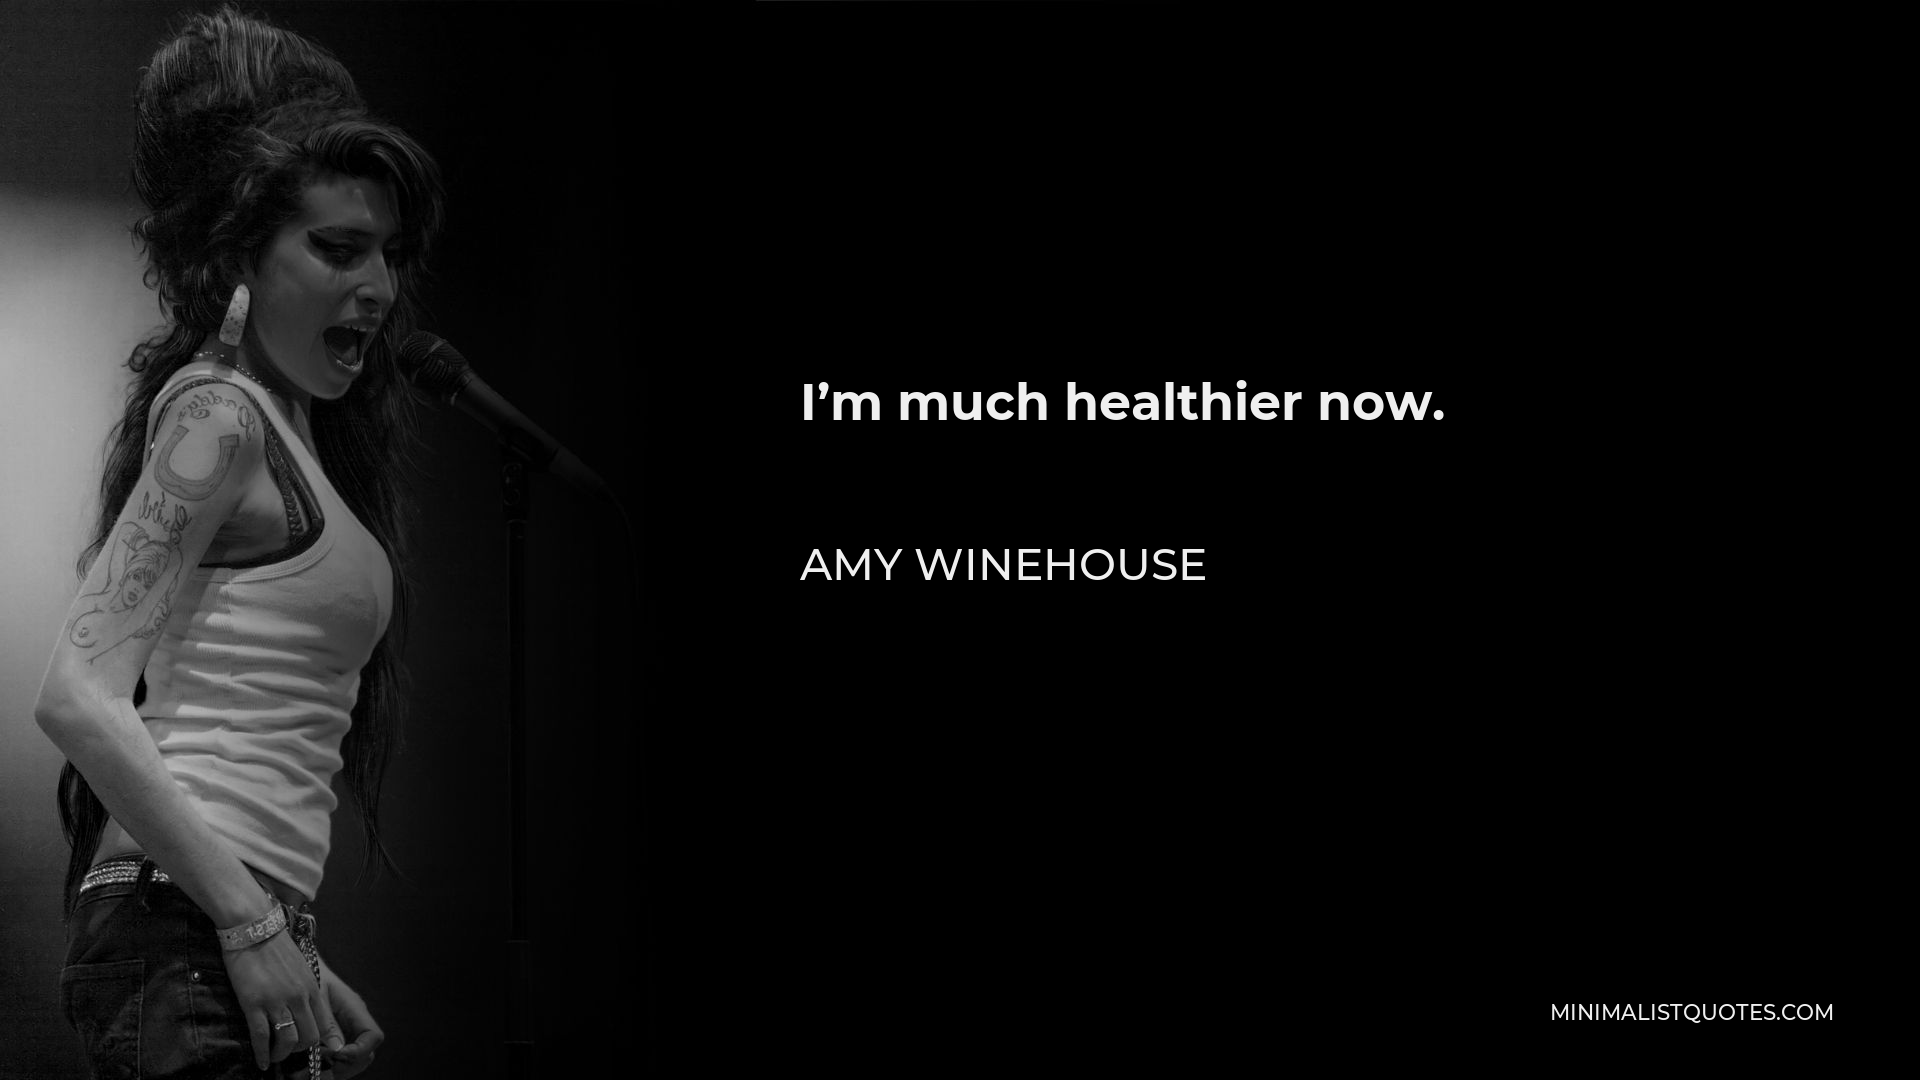 Amy Winehouse Quote - I’m much healthier now.